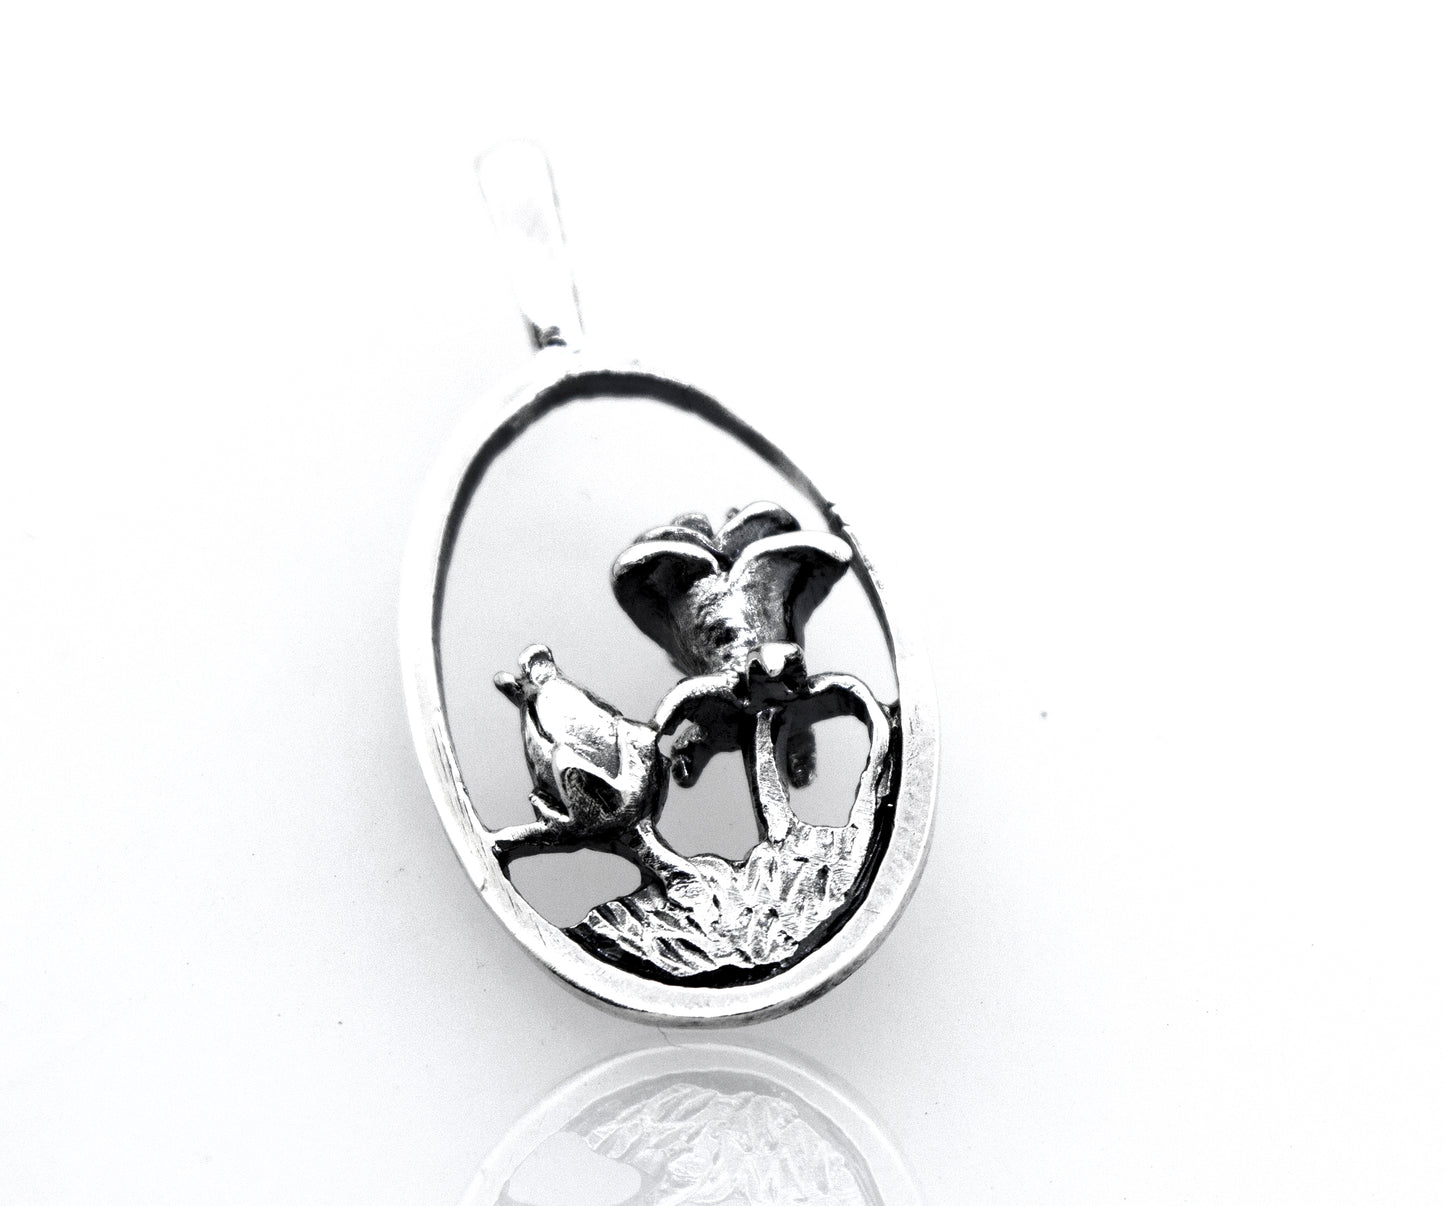 A Super Silver sterling silver pendant with a lotus flower on an oval shape.